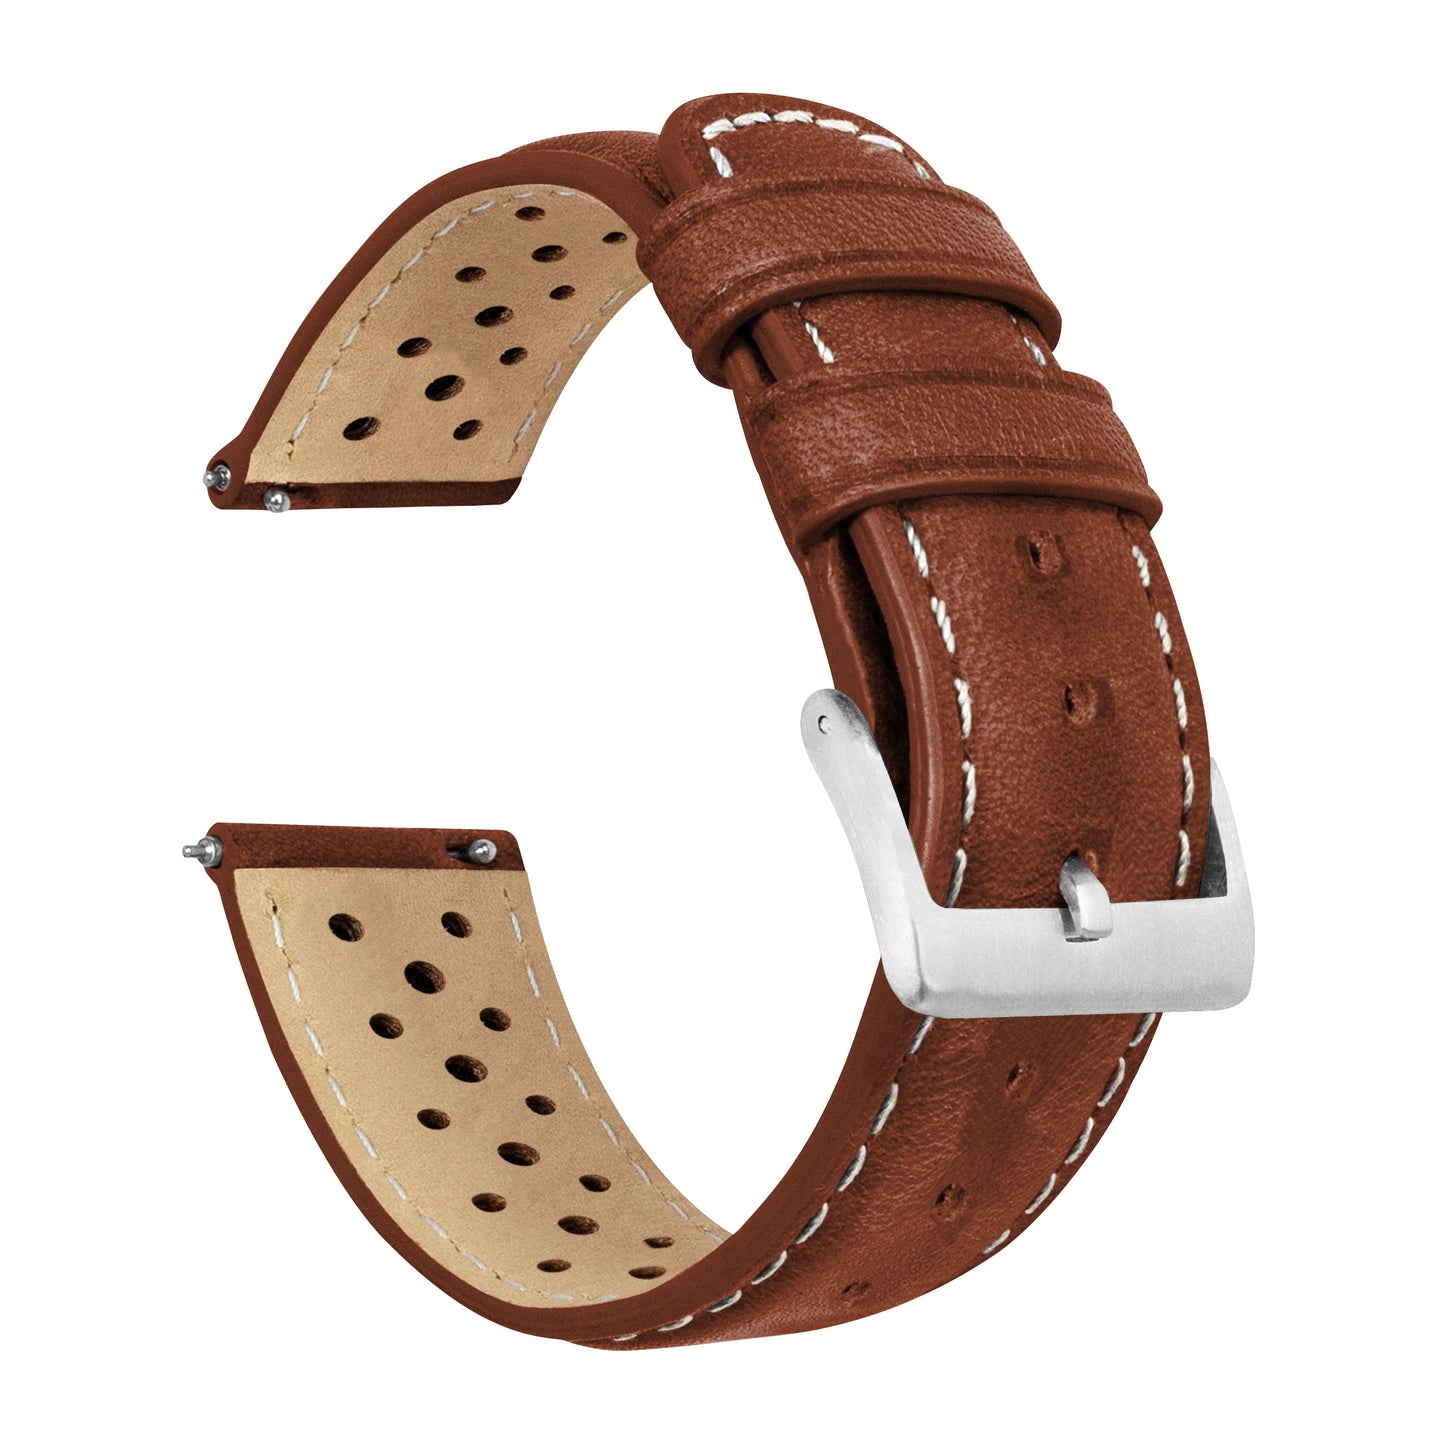 Samsung Galaxy Watch Active Racing Horween Leather Chocolate Brown Linen Stitch Watch Band